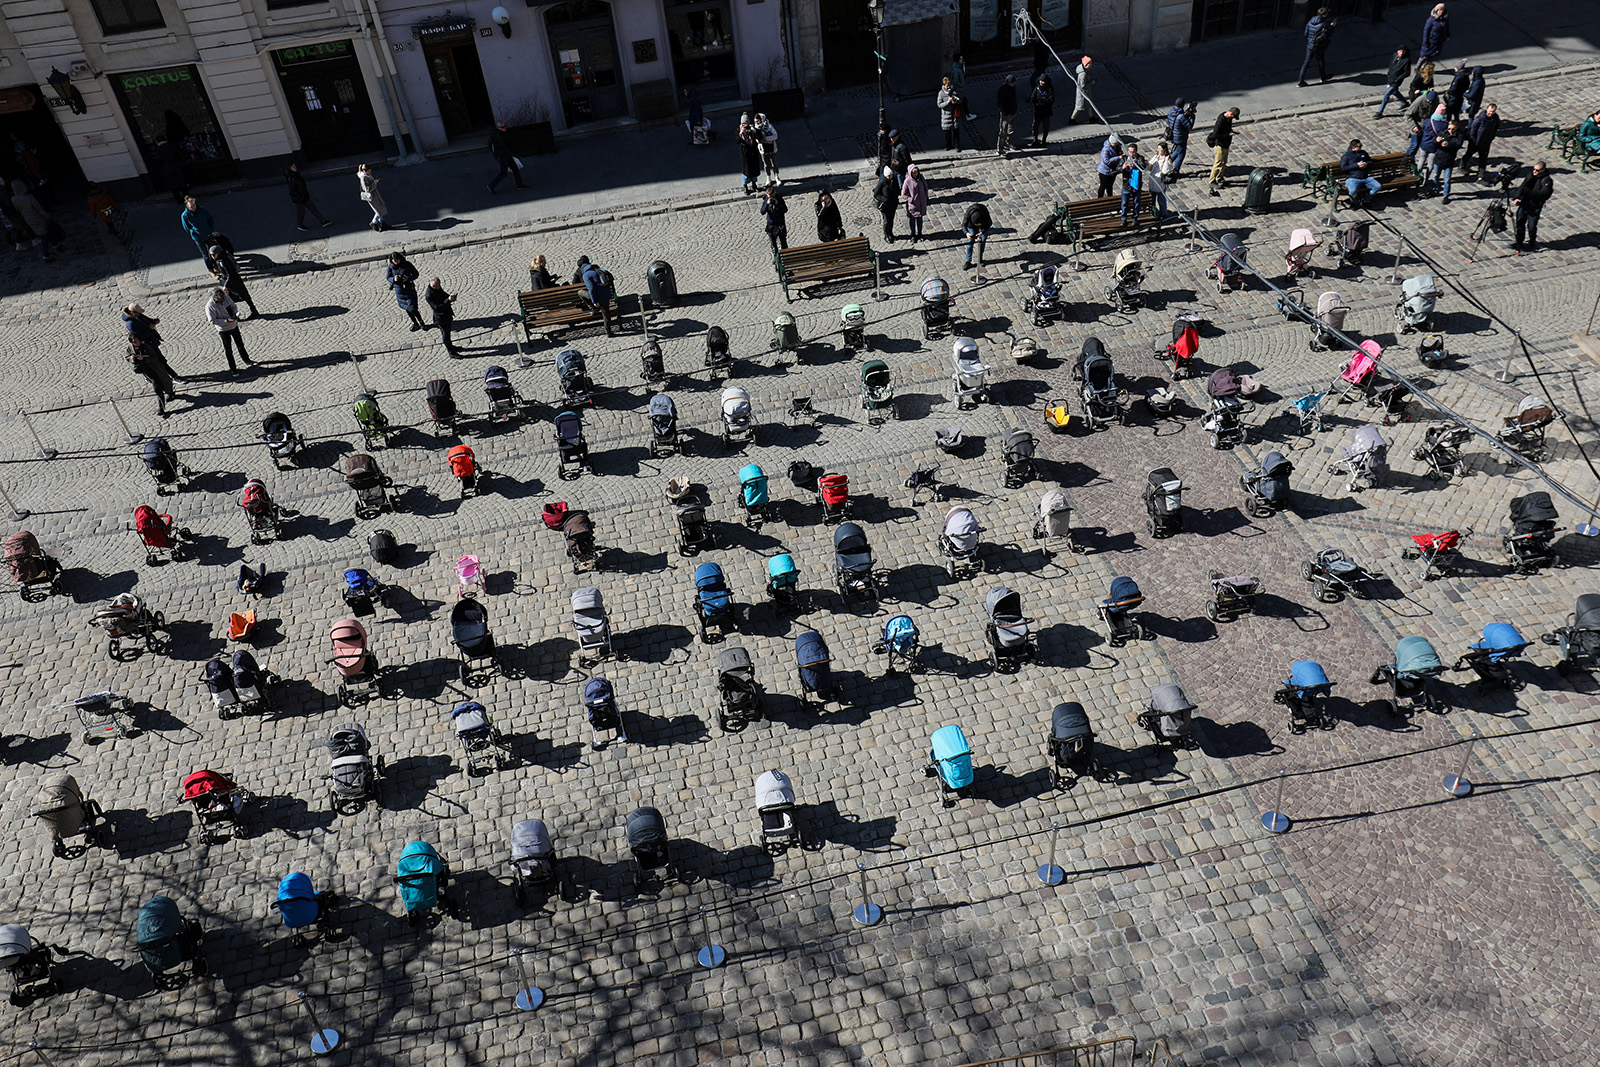 109 empty prams placed in the center of Lviv during the 